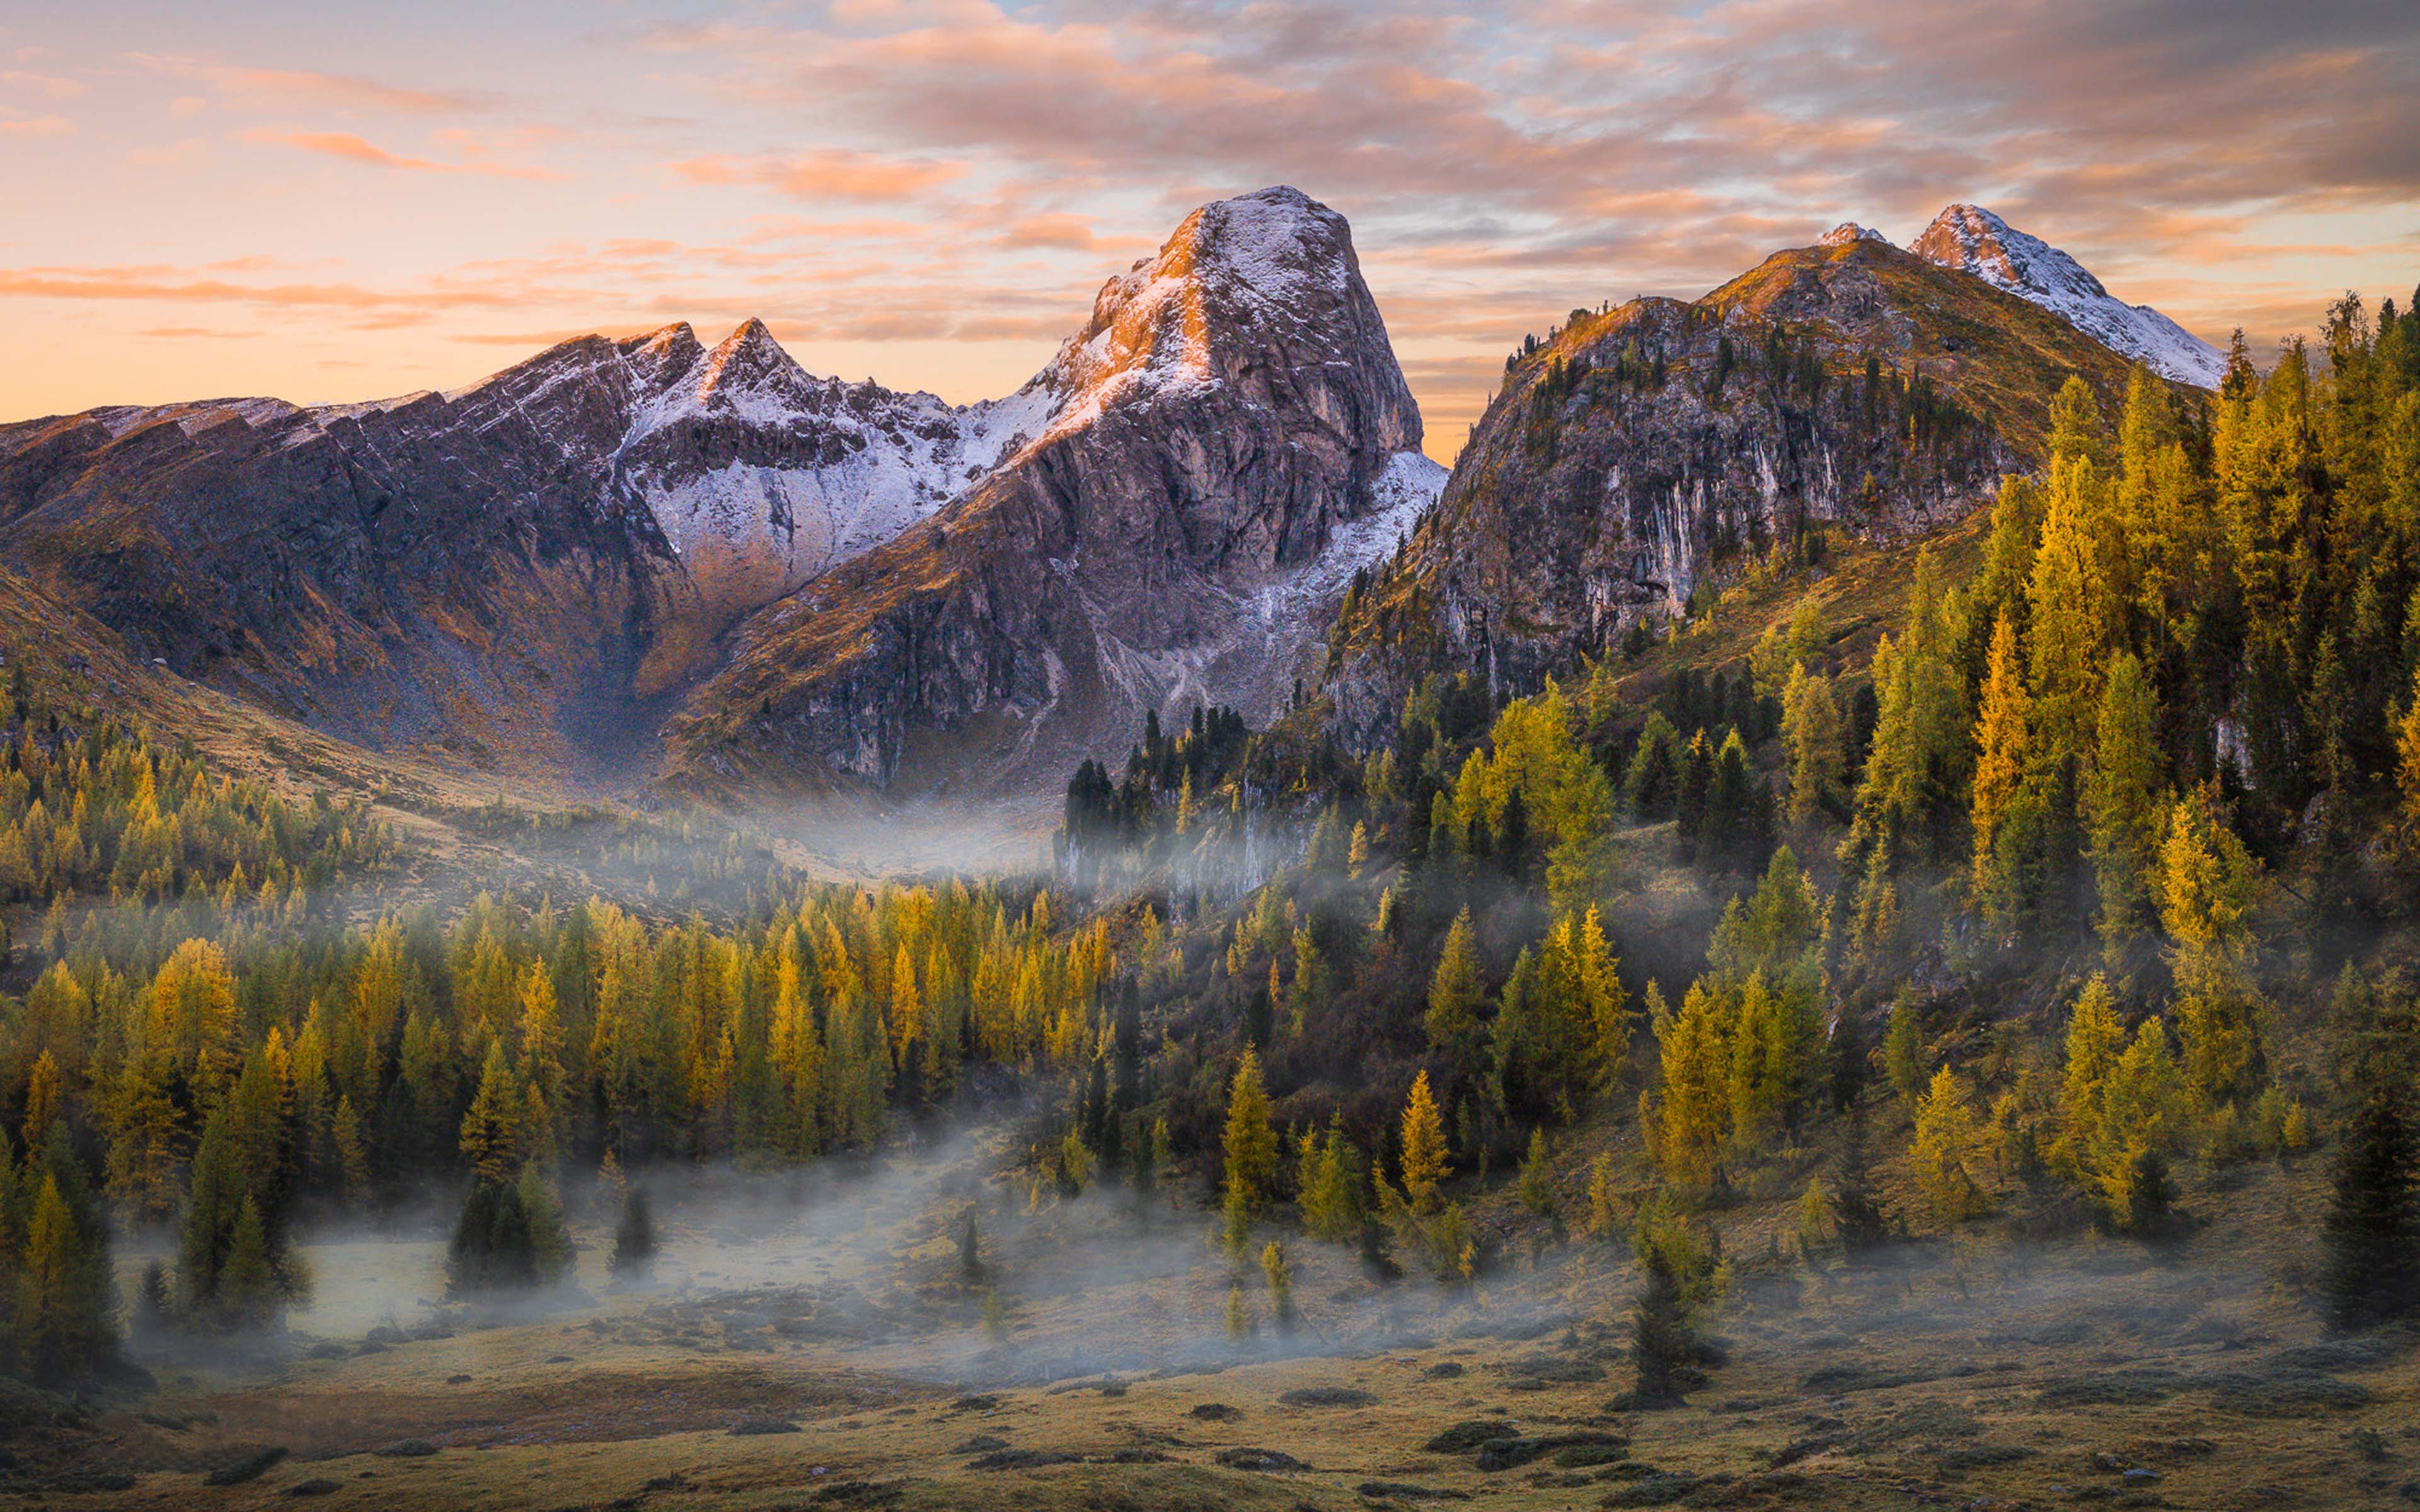 Autumn Morning Near Passo Di Giau Dolomites Italy Landscape Nature Android Wallpaper For Your Desktop Or Phone 3840x2400, Wallpaper13.com